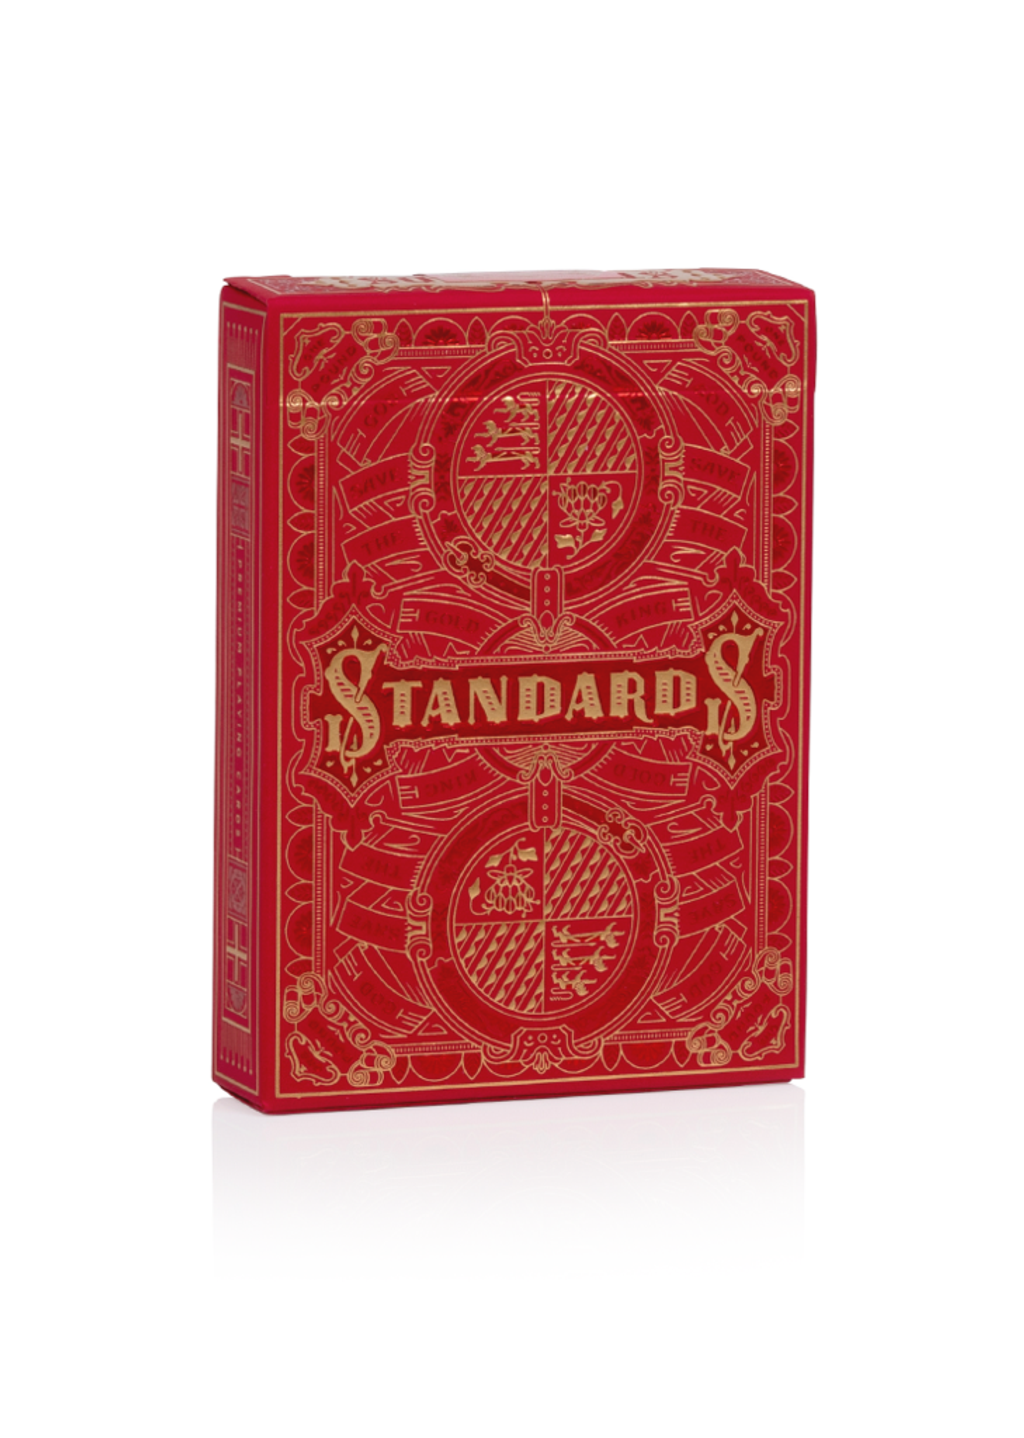 gold-standards-playing-cards-red_1024x1024.png